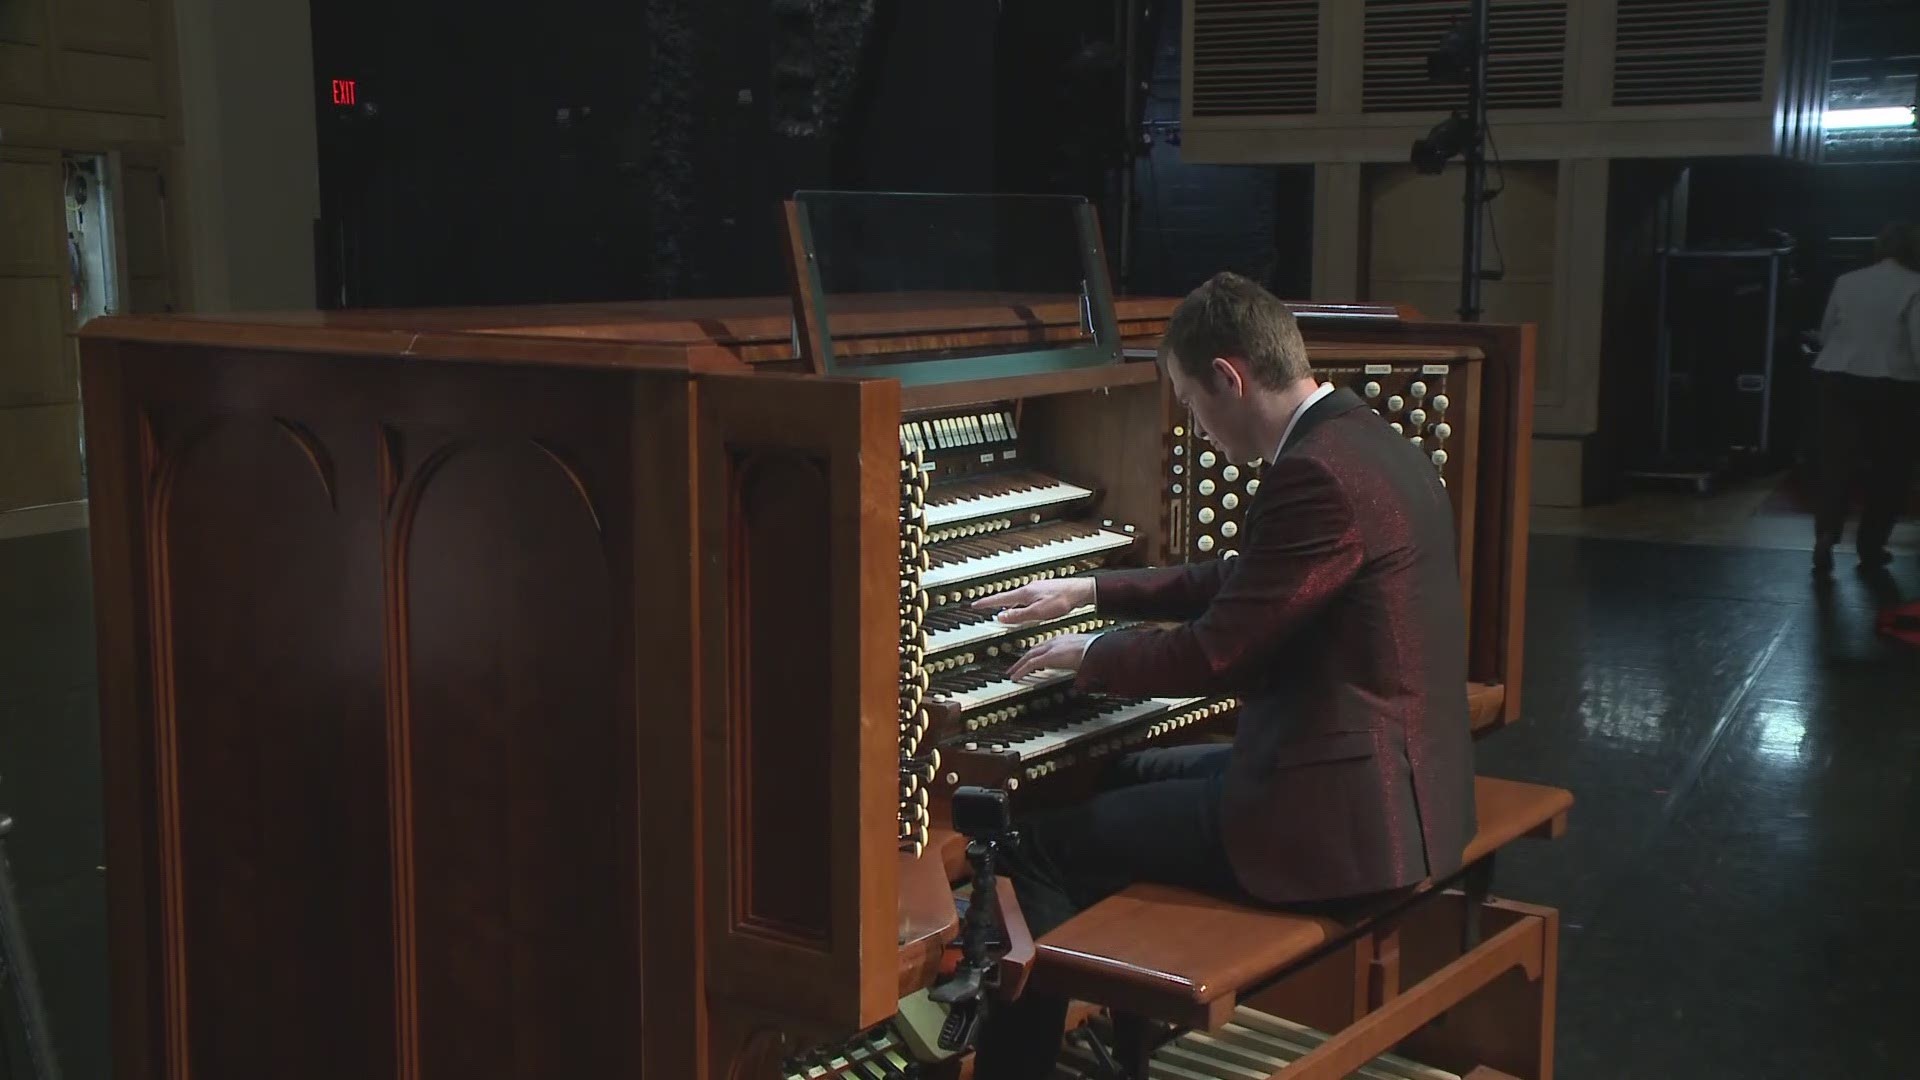 Organist James Kennerley is known for his improvisation; here's his take on "O Holy Night."